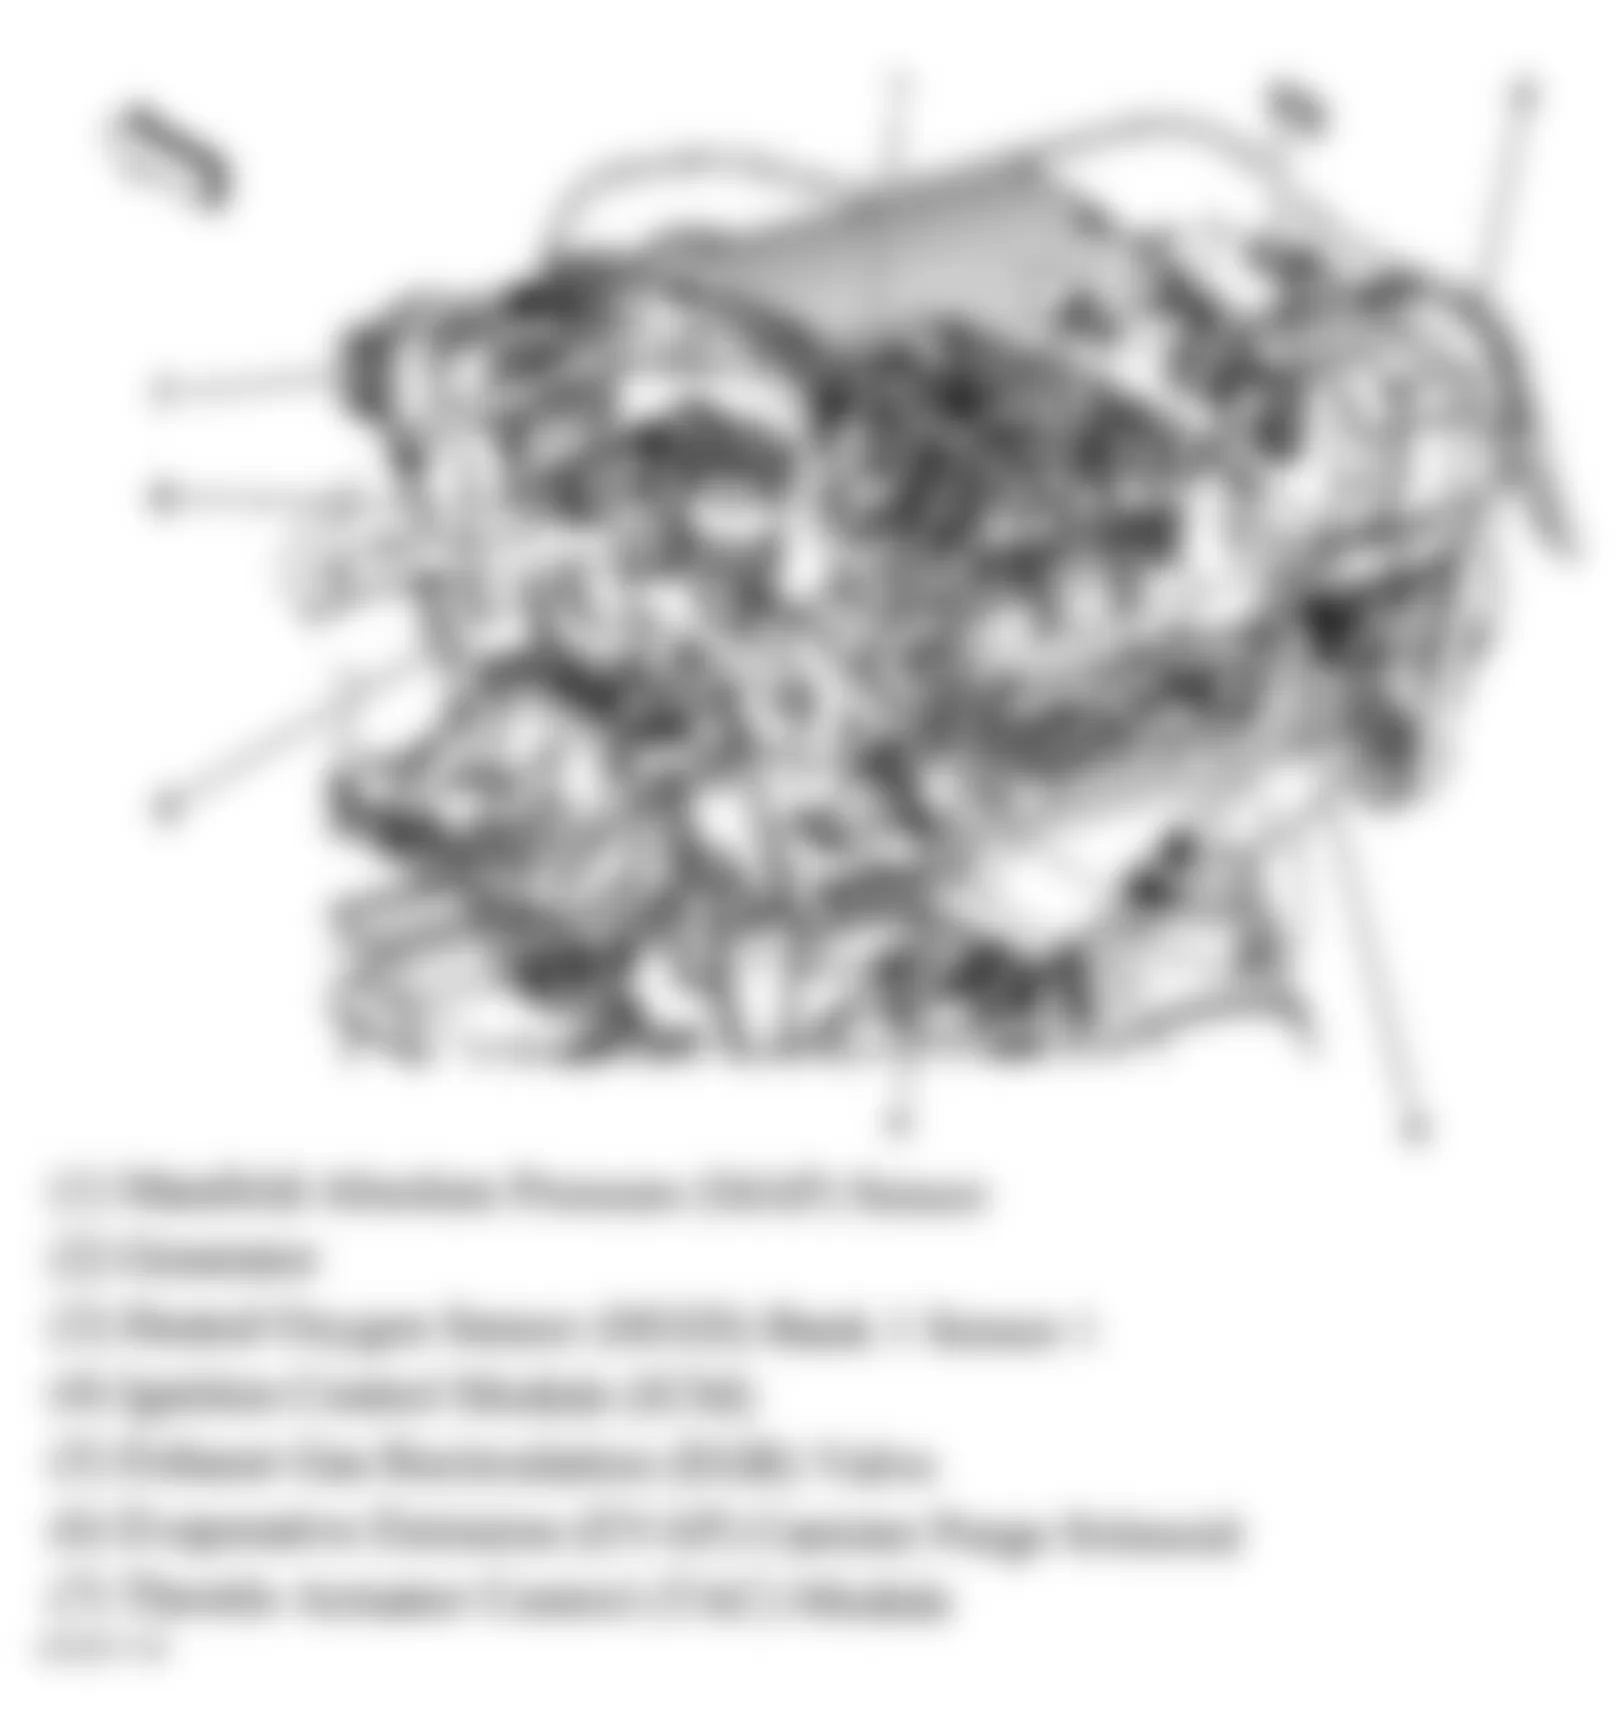 Chevrolet Malibu SS 2006 - Component Locations -  Top Of Engine (3.5L)